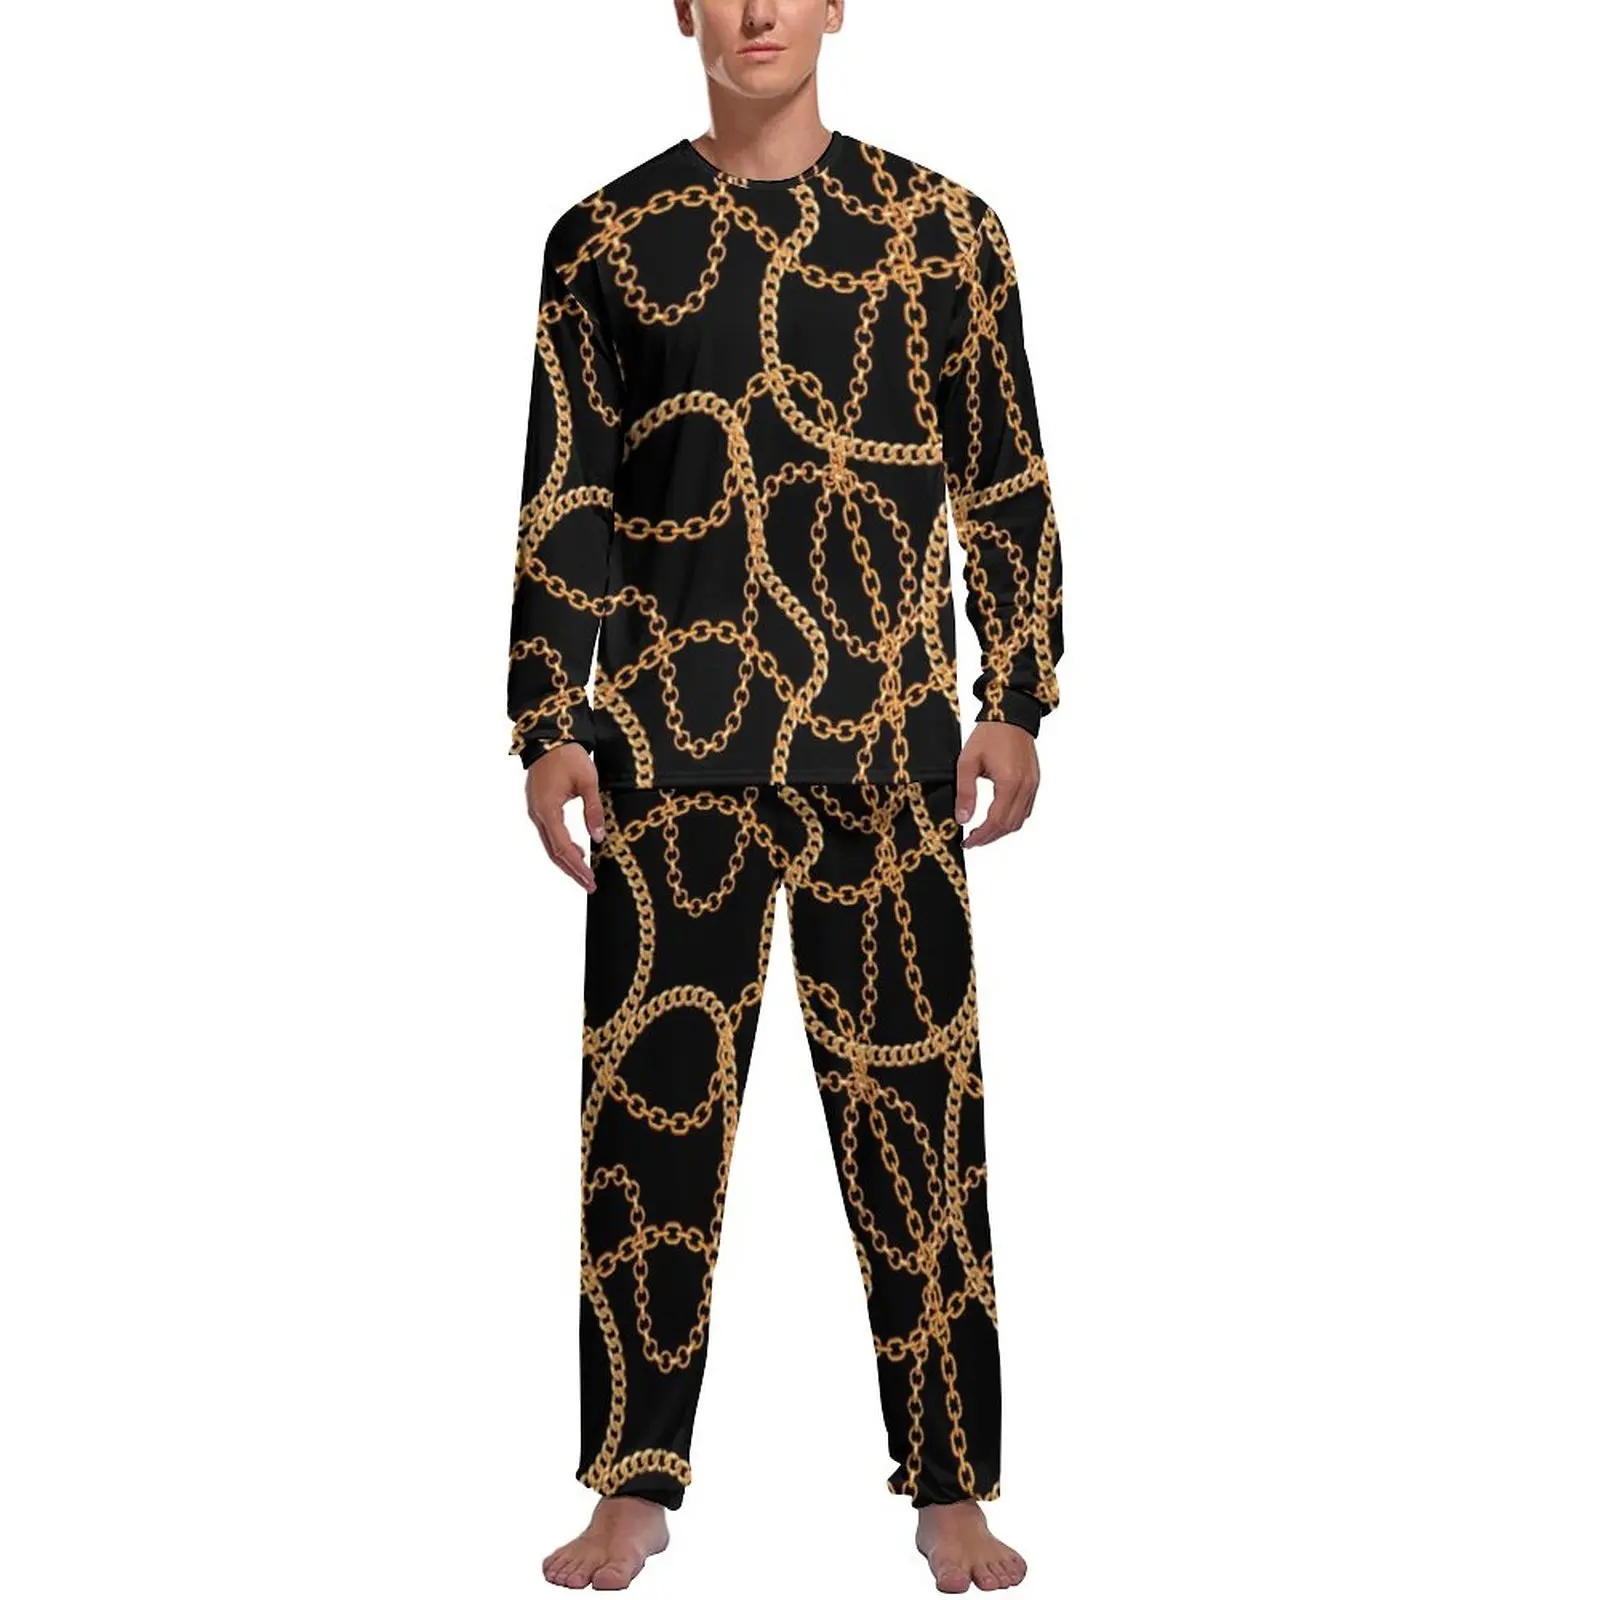 Chain Print Pajamas Men Gold Chains Luxury Lovely Home Suit Daily Long Sleeve 2 Pieces Casual Graphic Pajama Sets